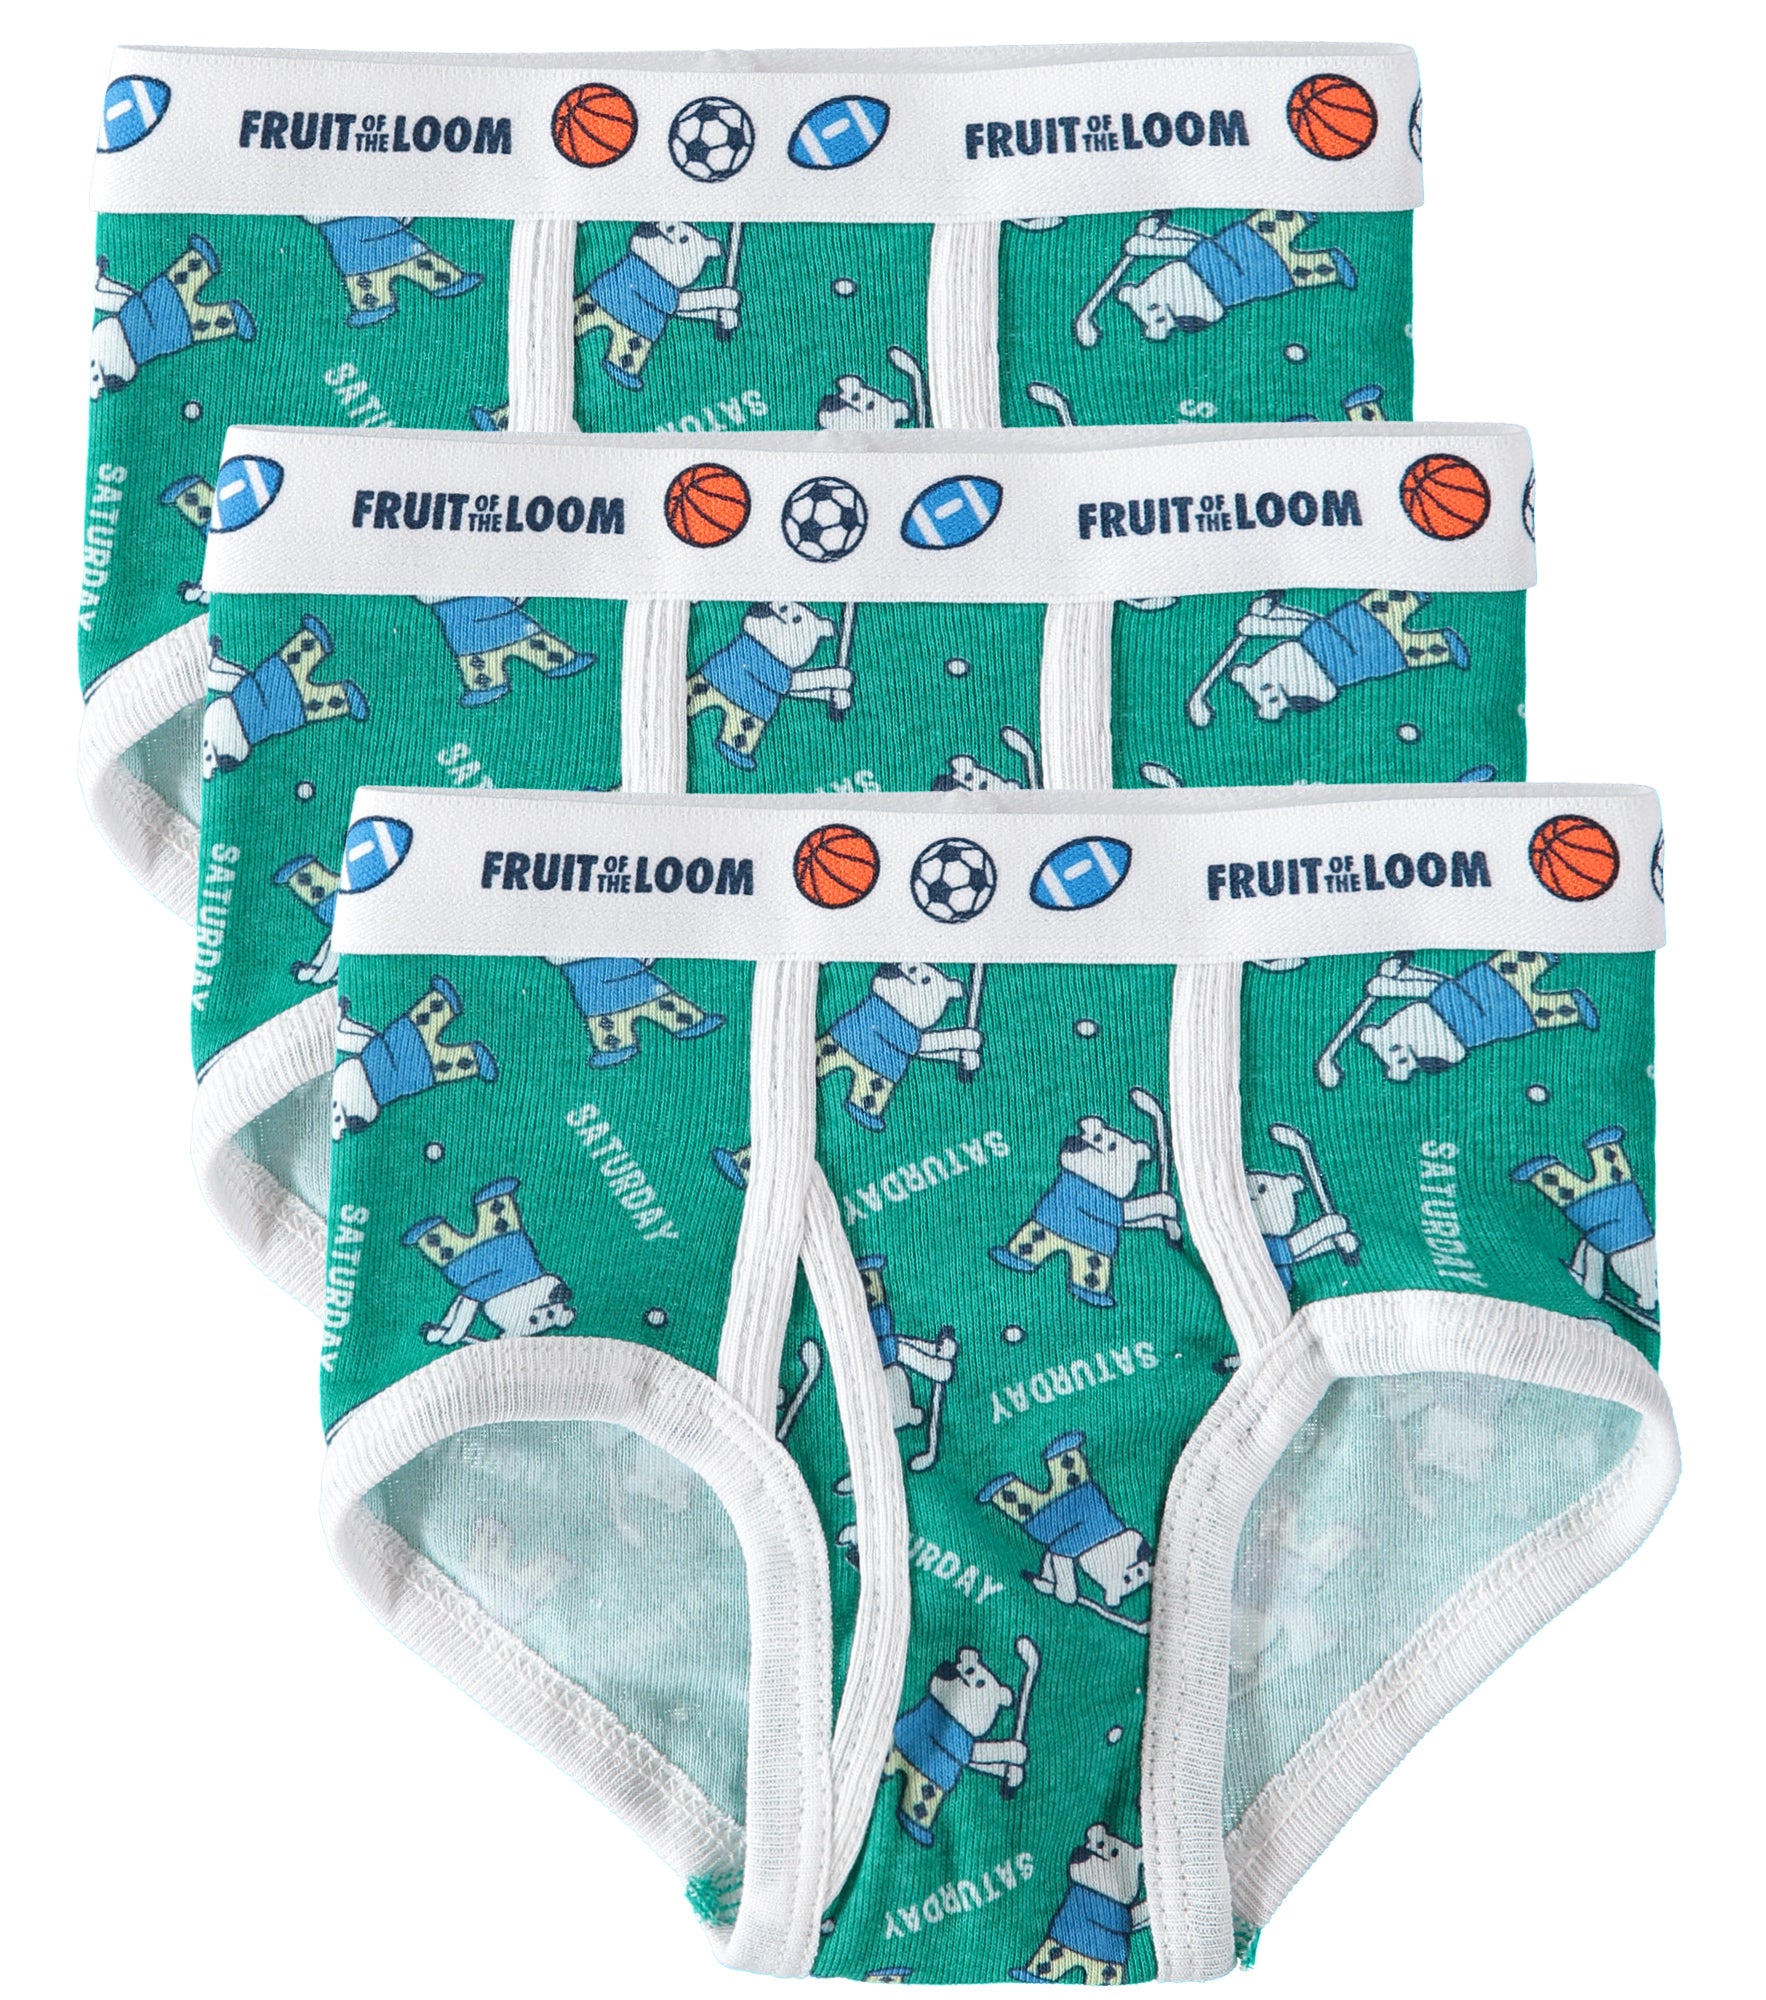 Fruit of the Loom Boys 2T-5T 3-Pack Briefs